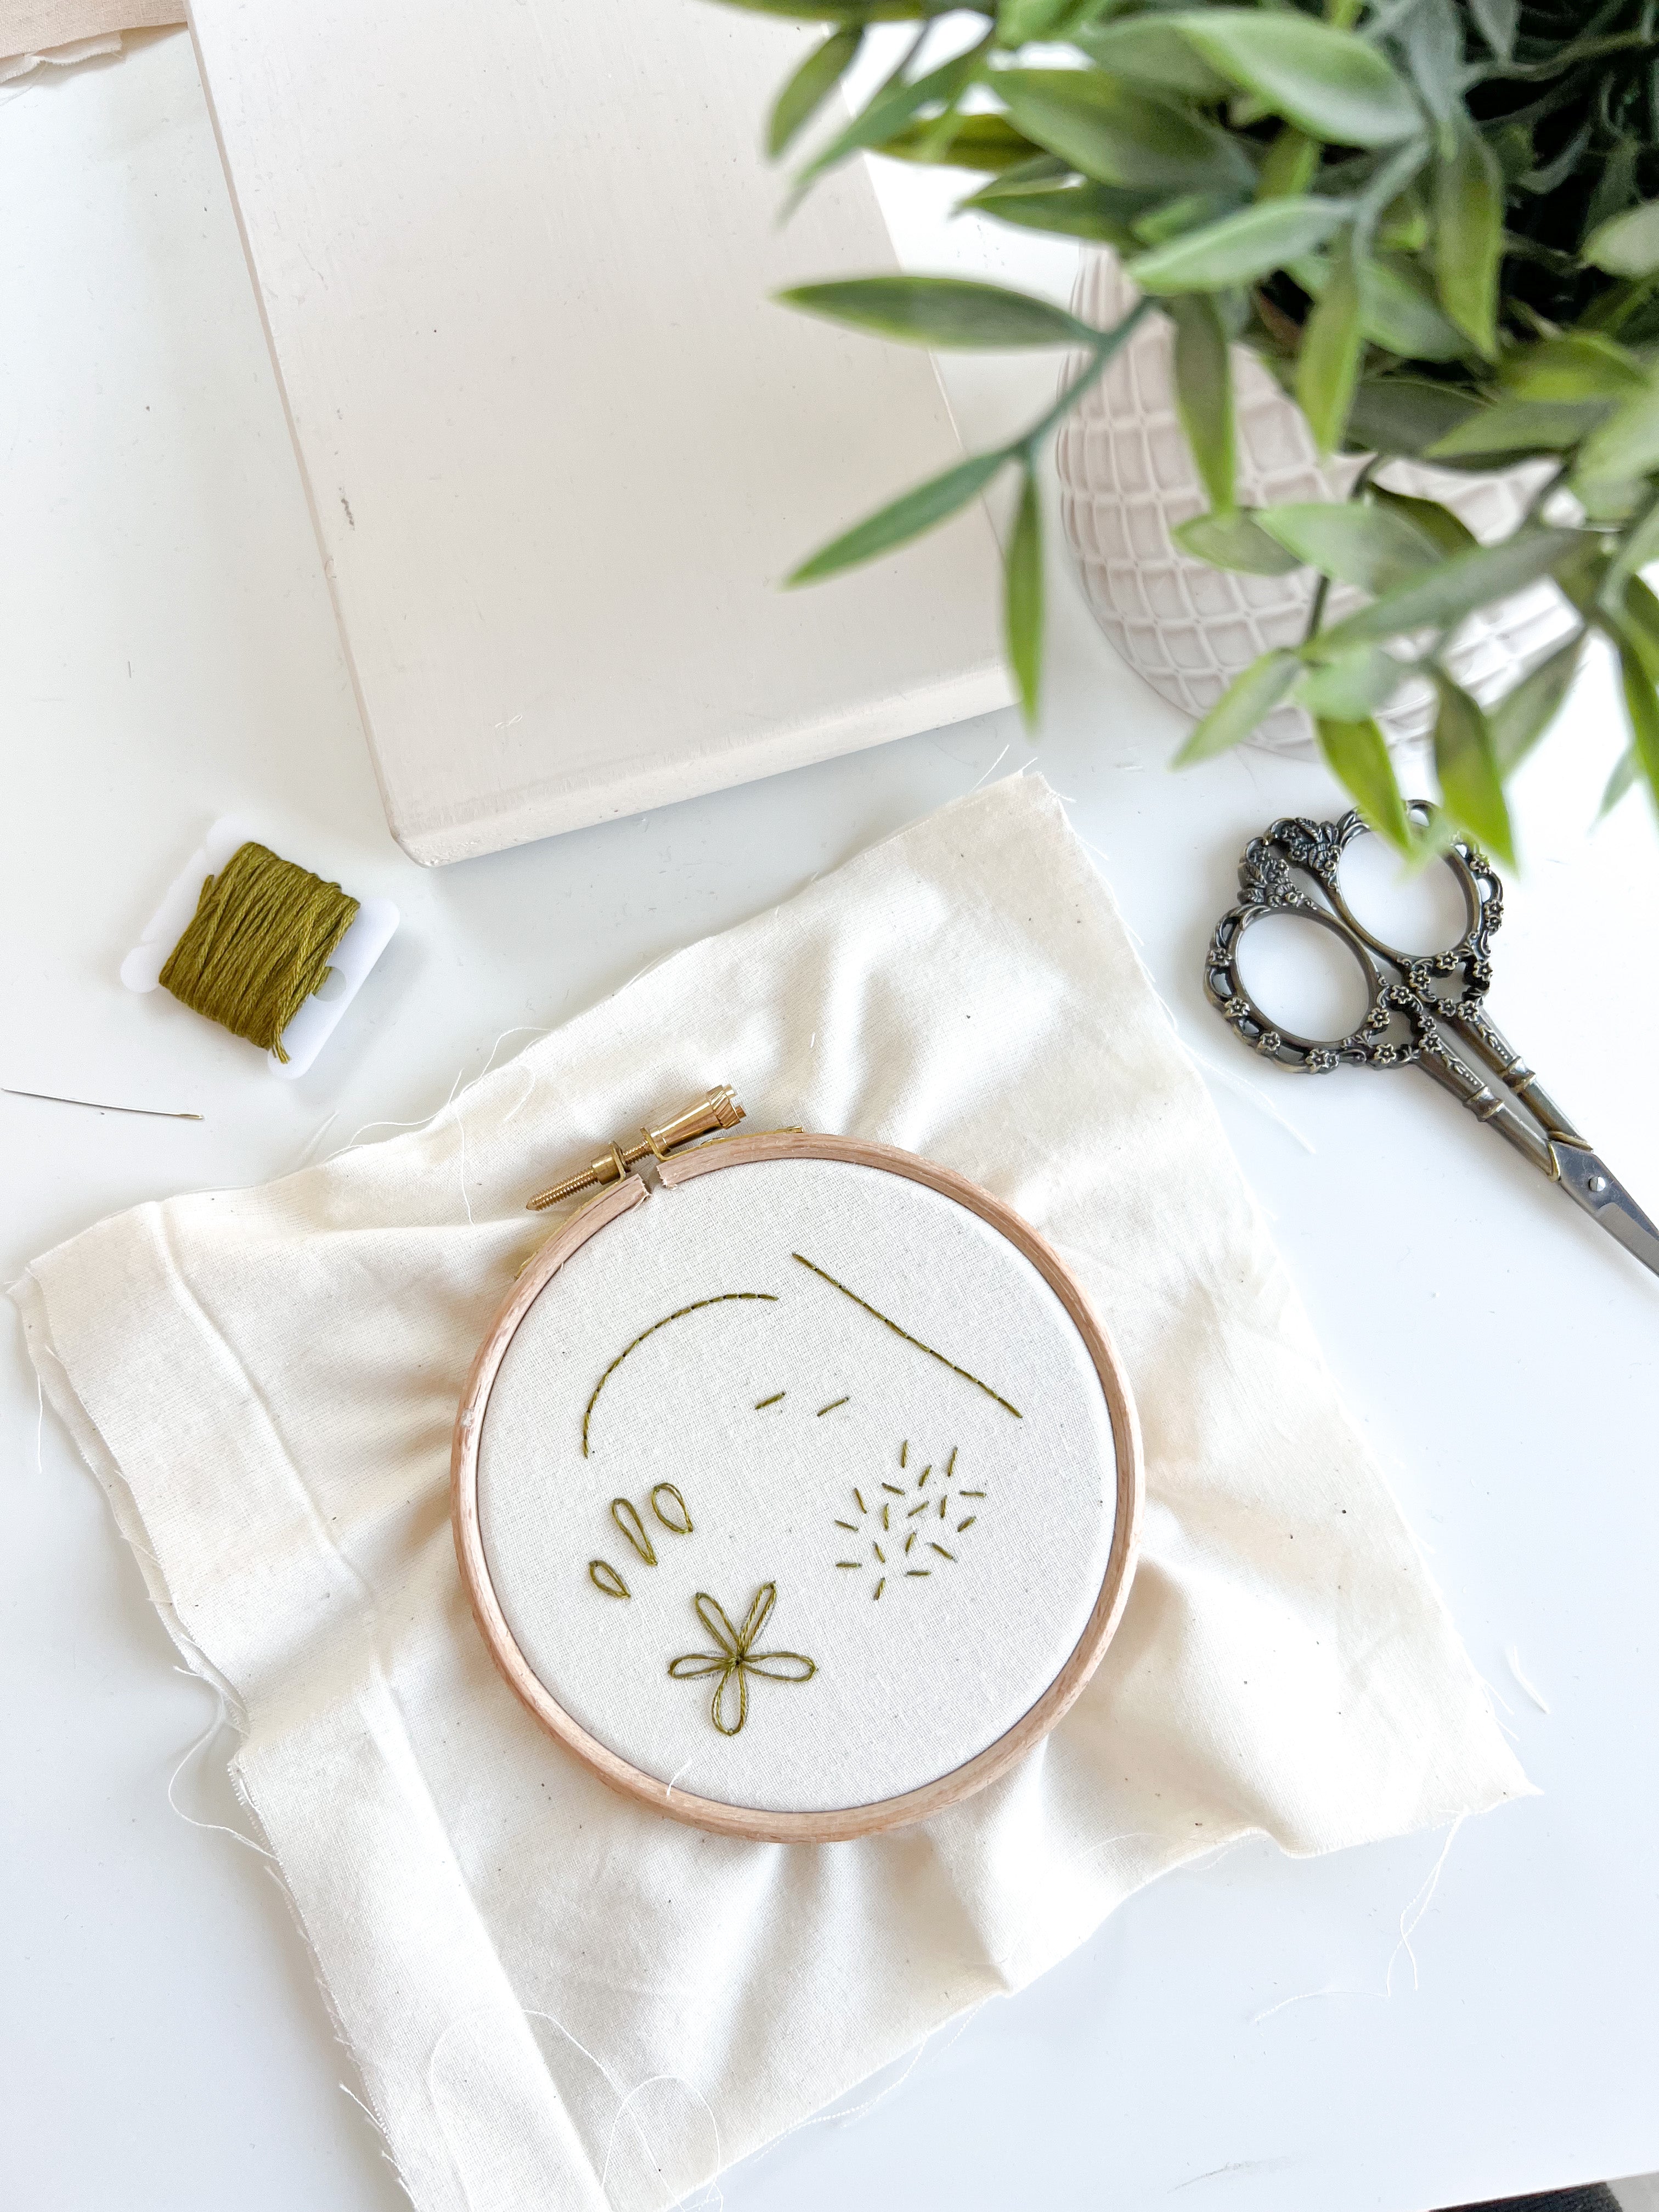 Starting Your Embroidery Journey: Setting Goals and Expectations